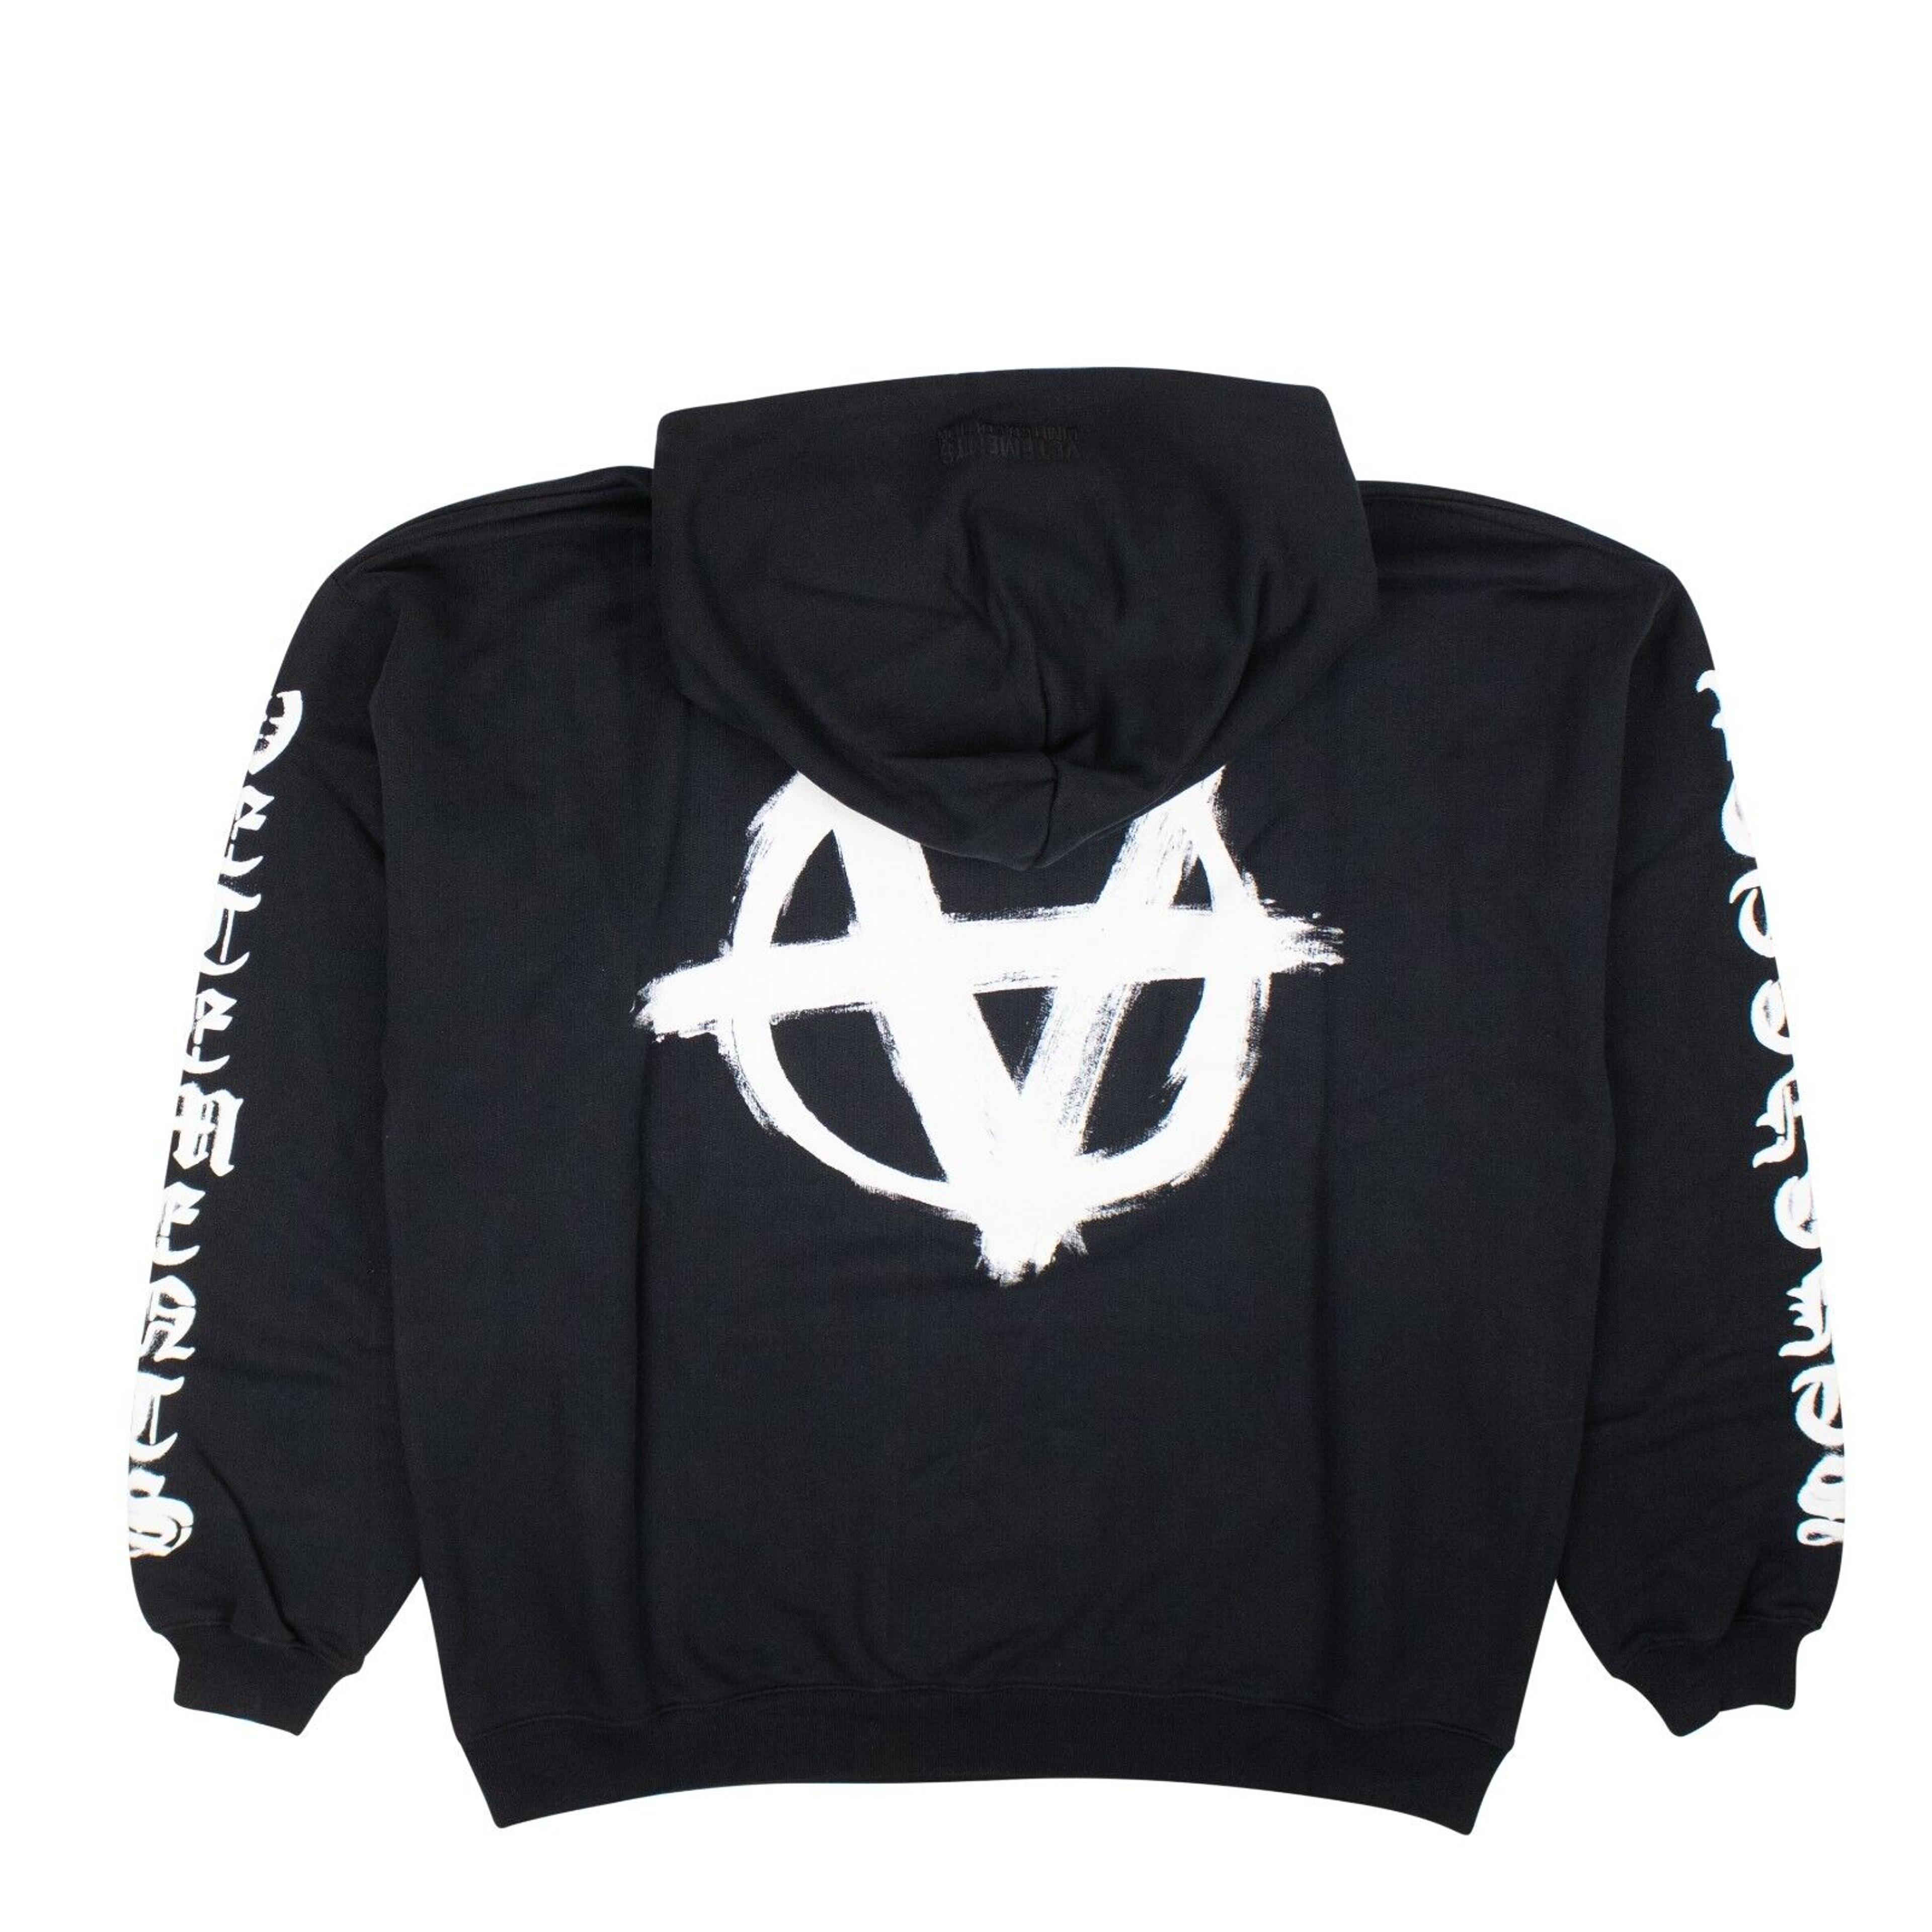 Alternate View 3 of Black Double Anarchy Popover Hoodie